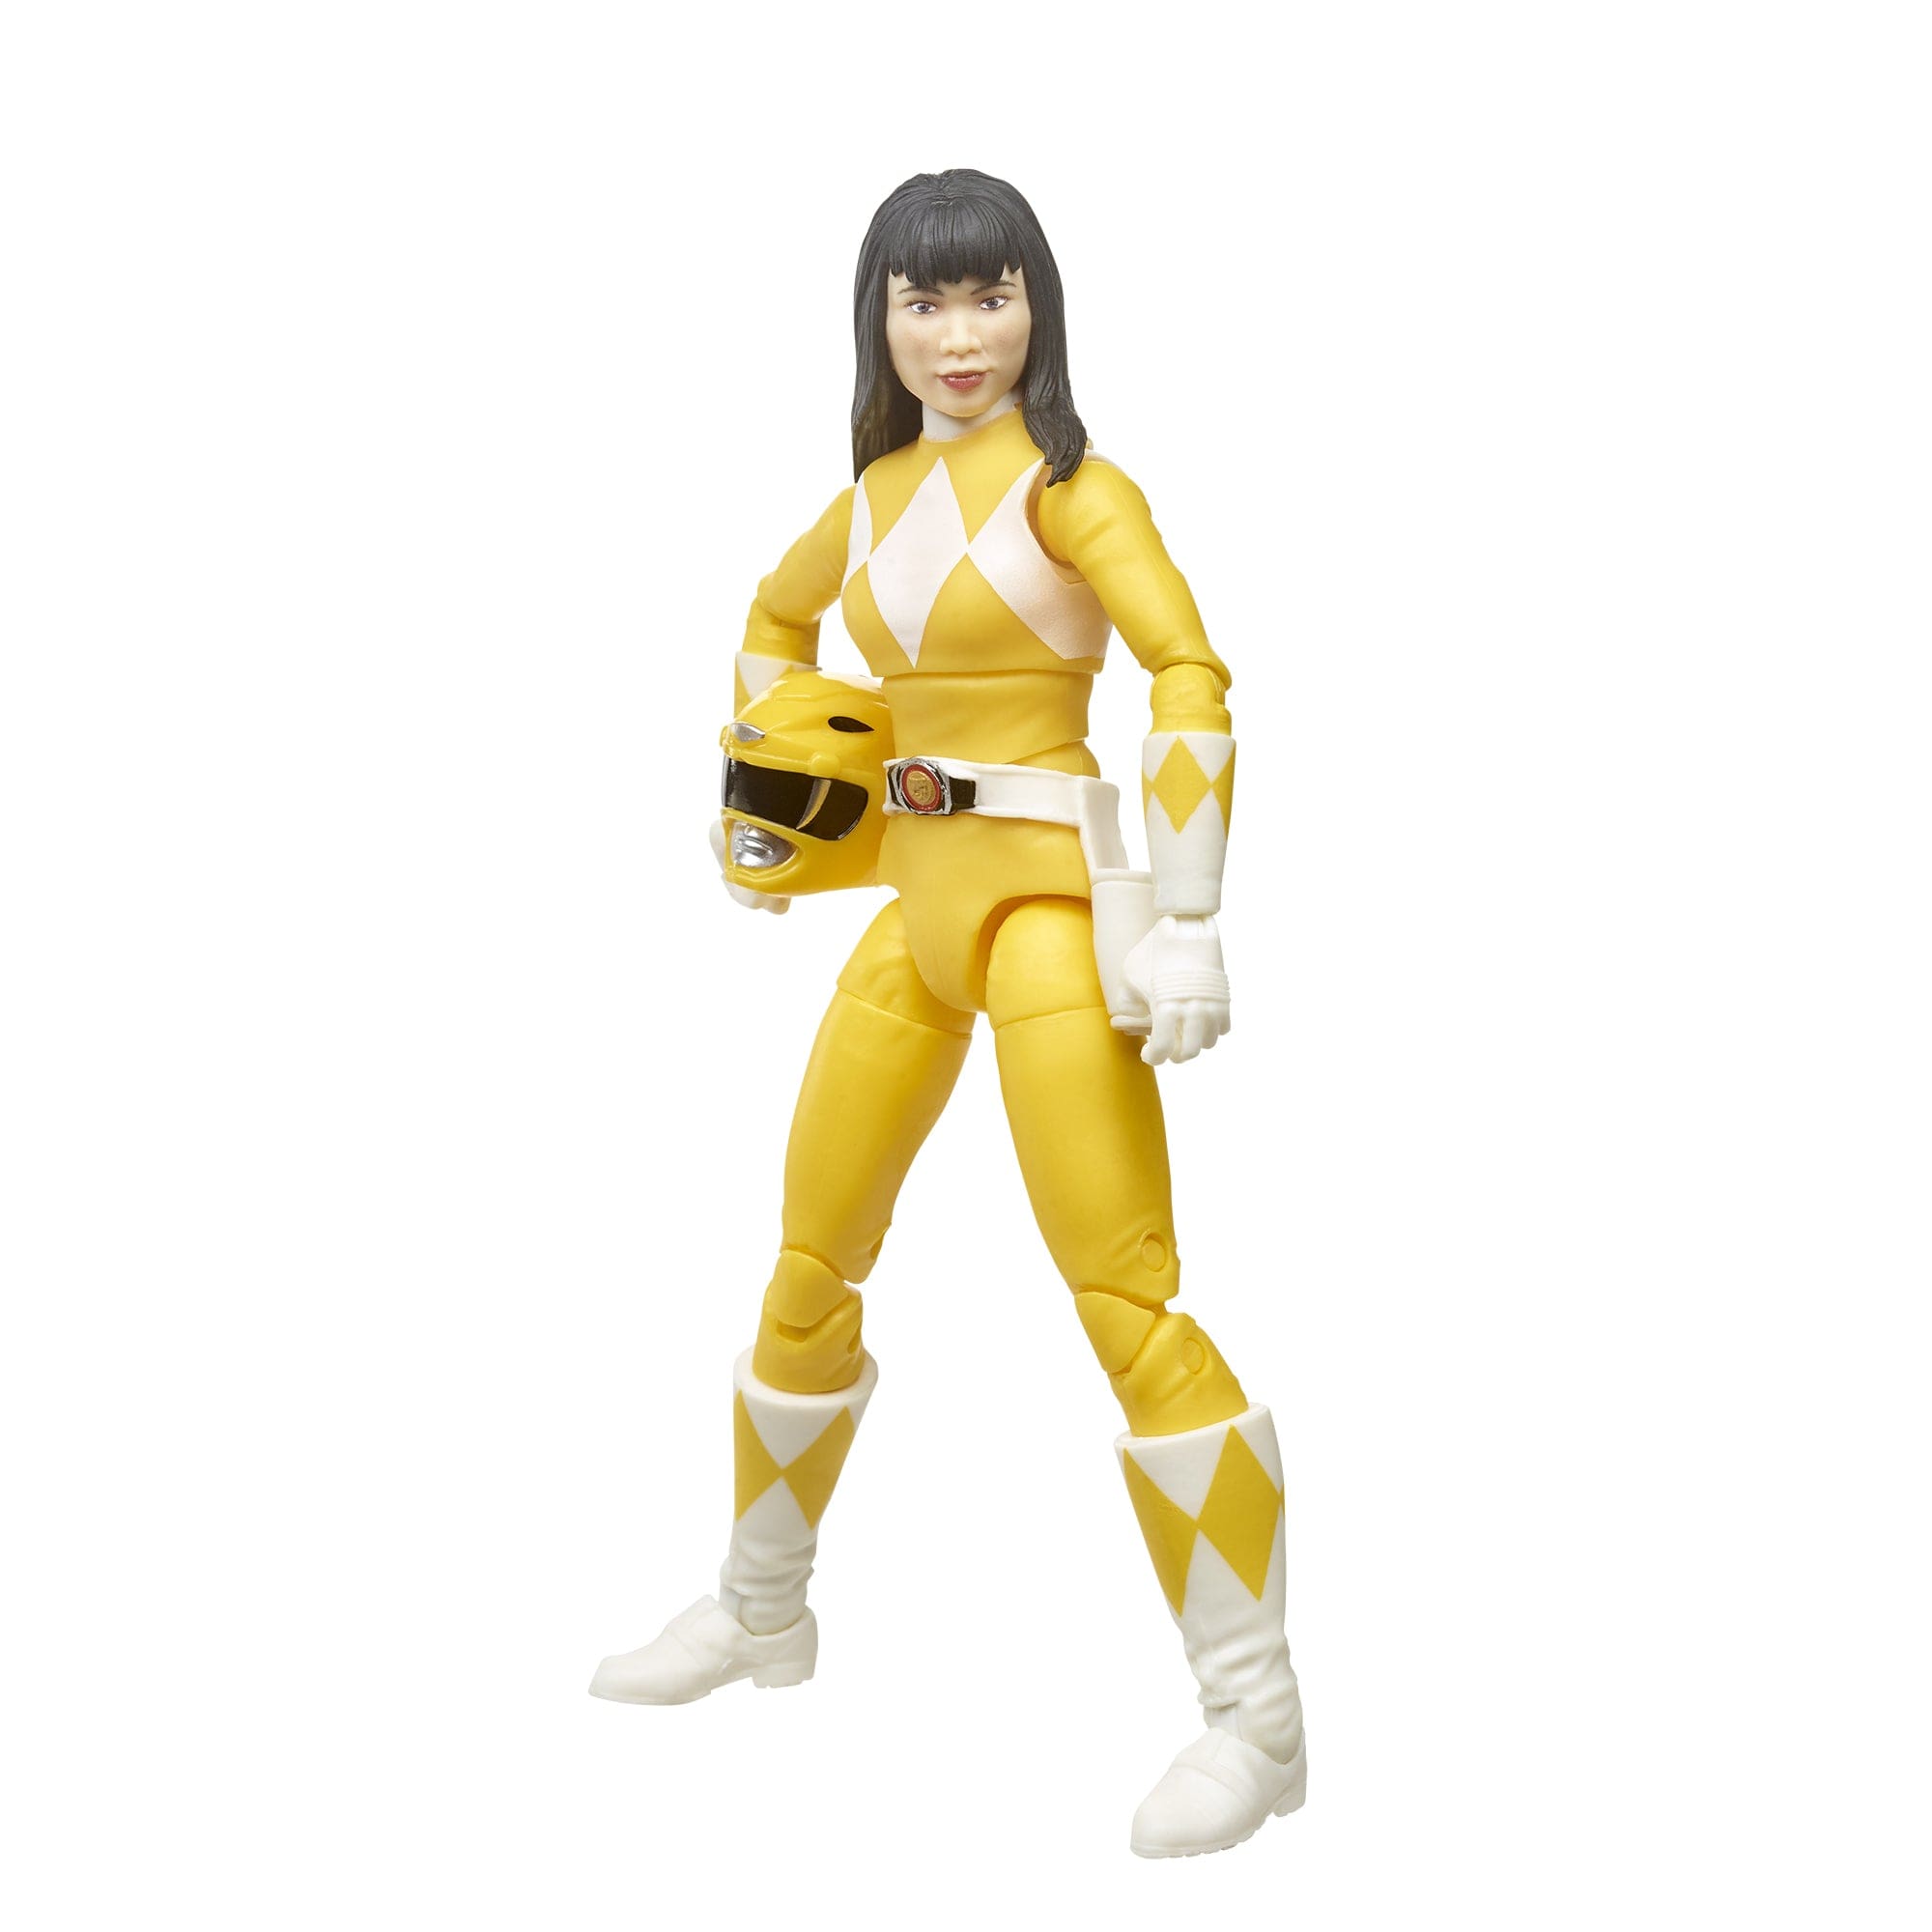 Power Rangers WILD FORCE YELLOW Action Figure Toy